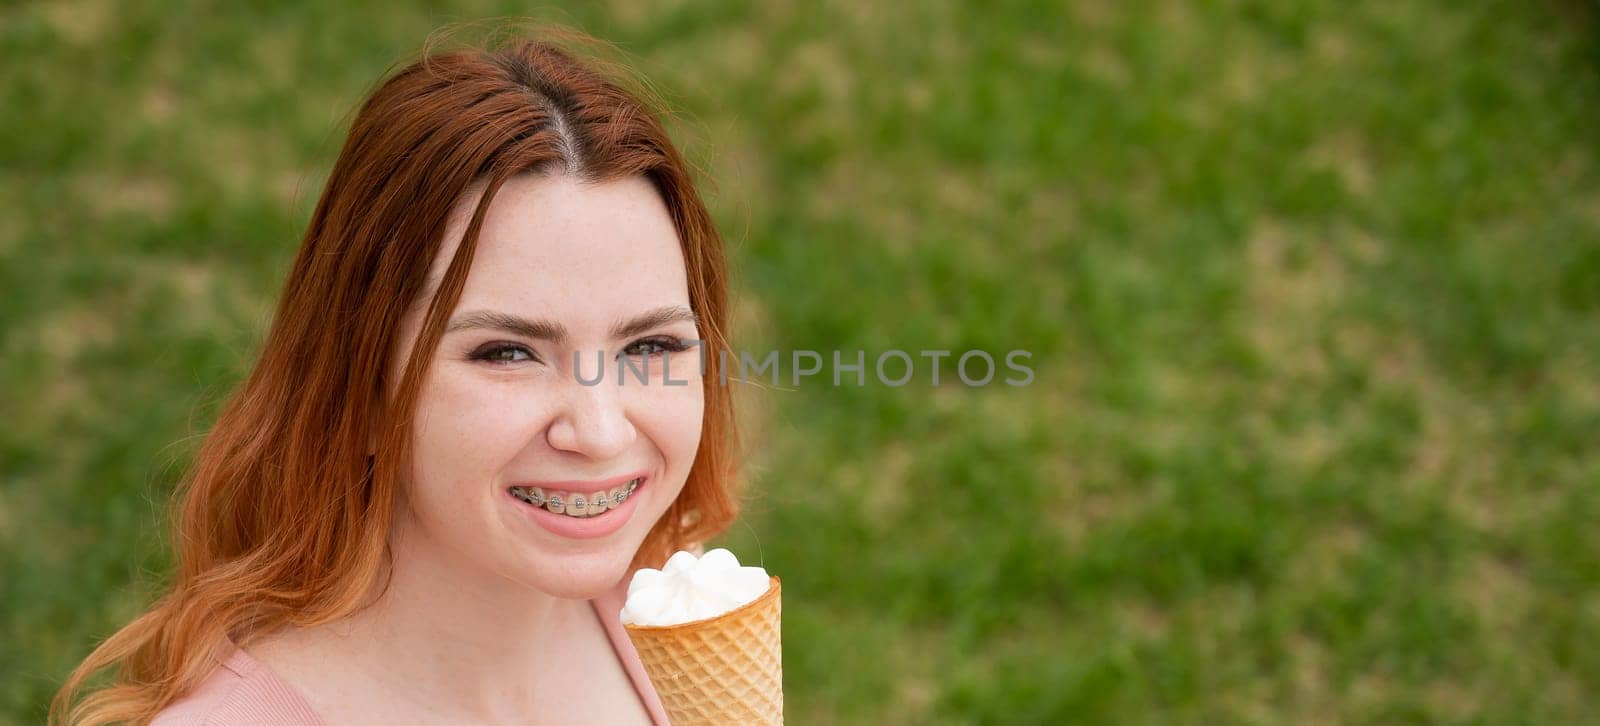 Young beautiful red-haired woman smiling with braces and eating an ice cream cone outdoors. Widescreen. by mrwed54